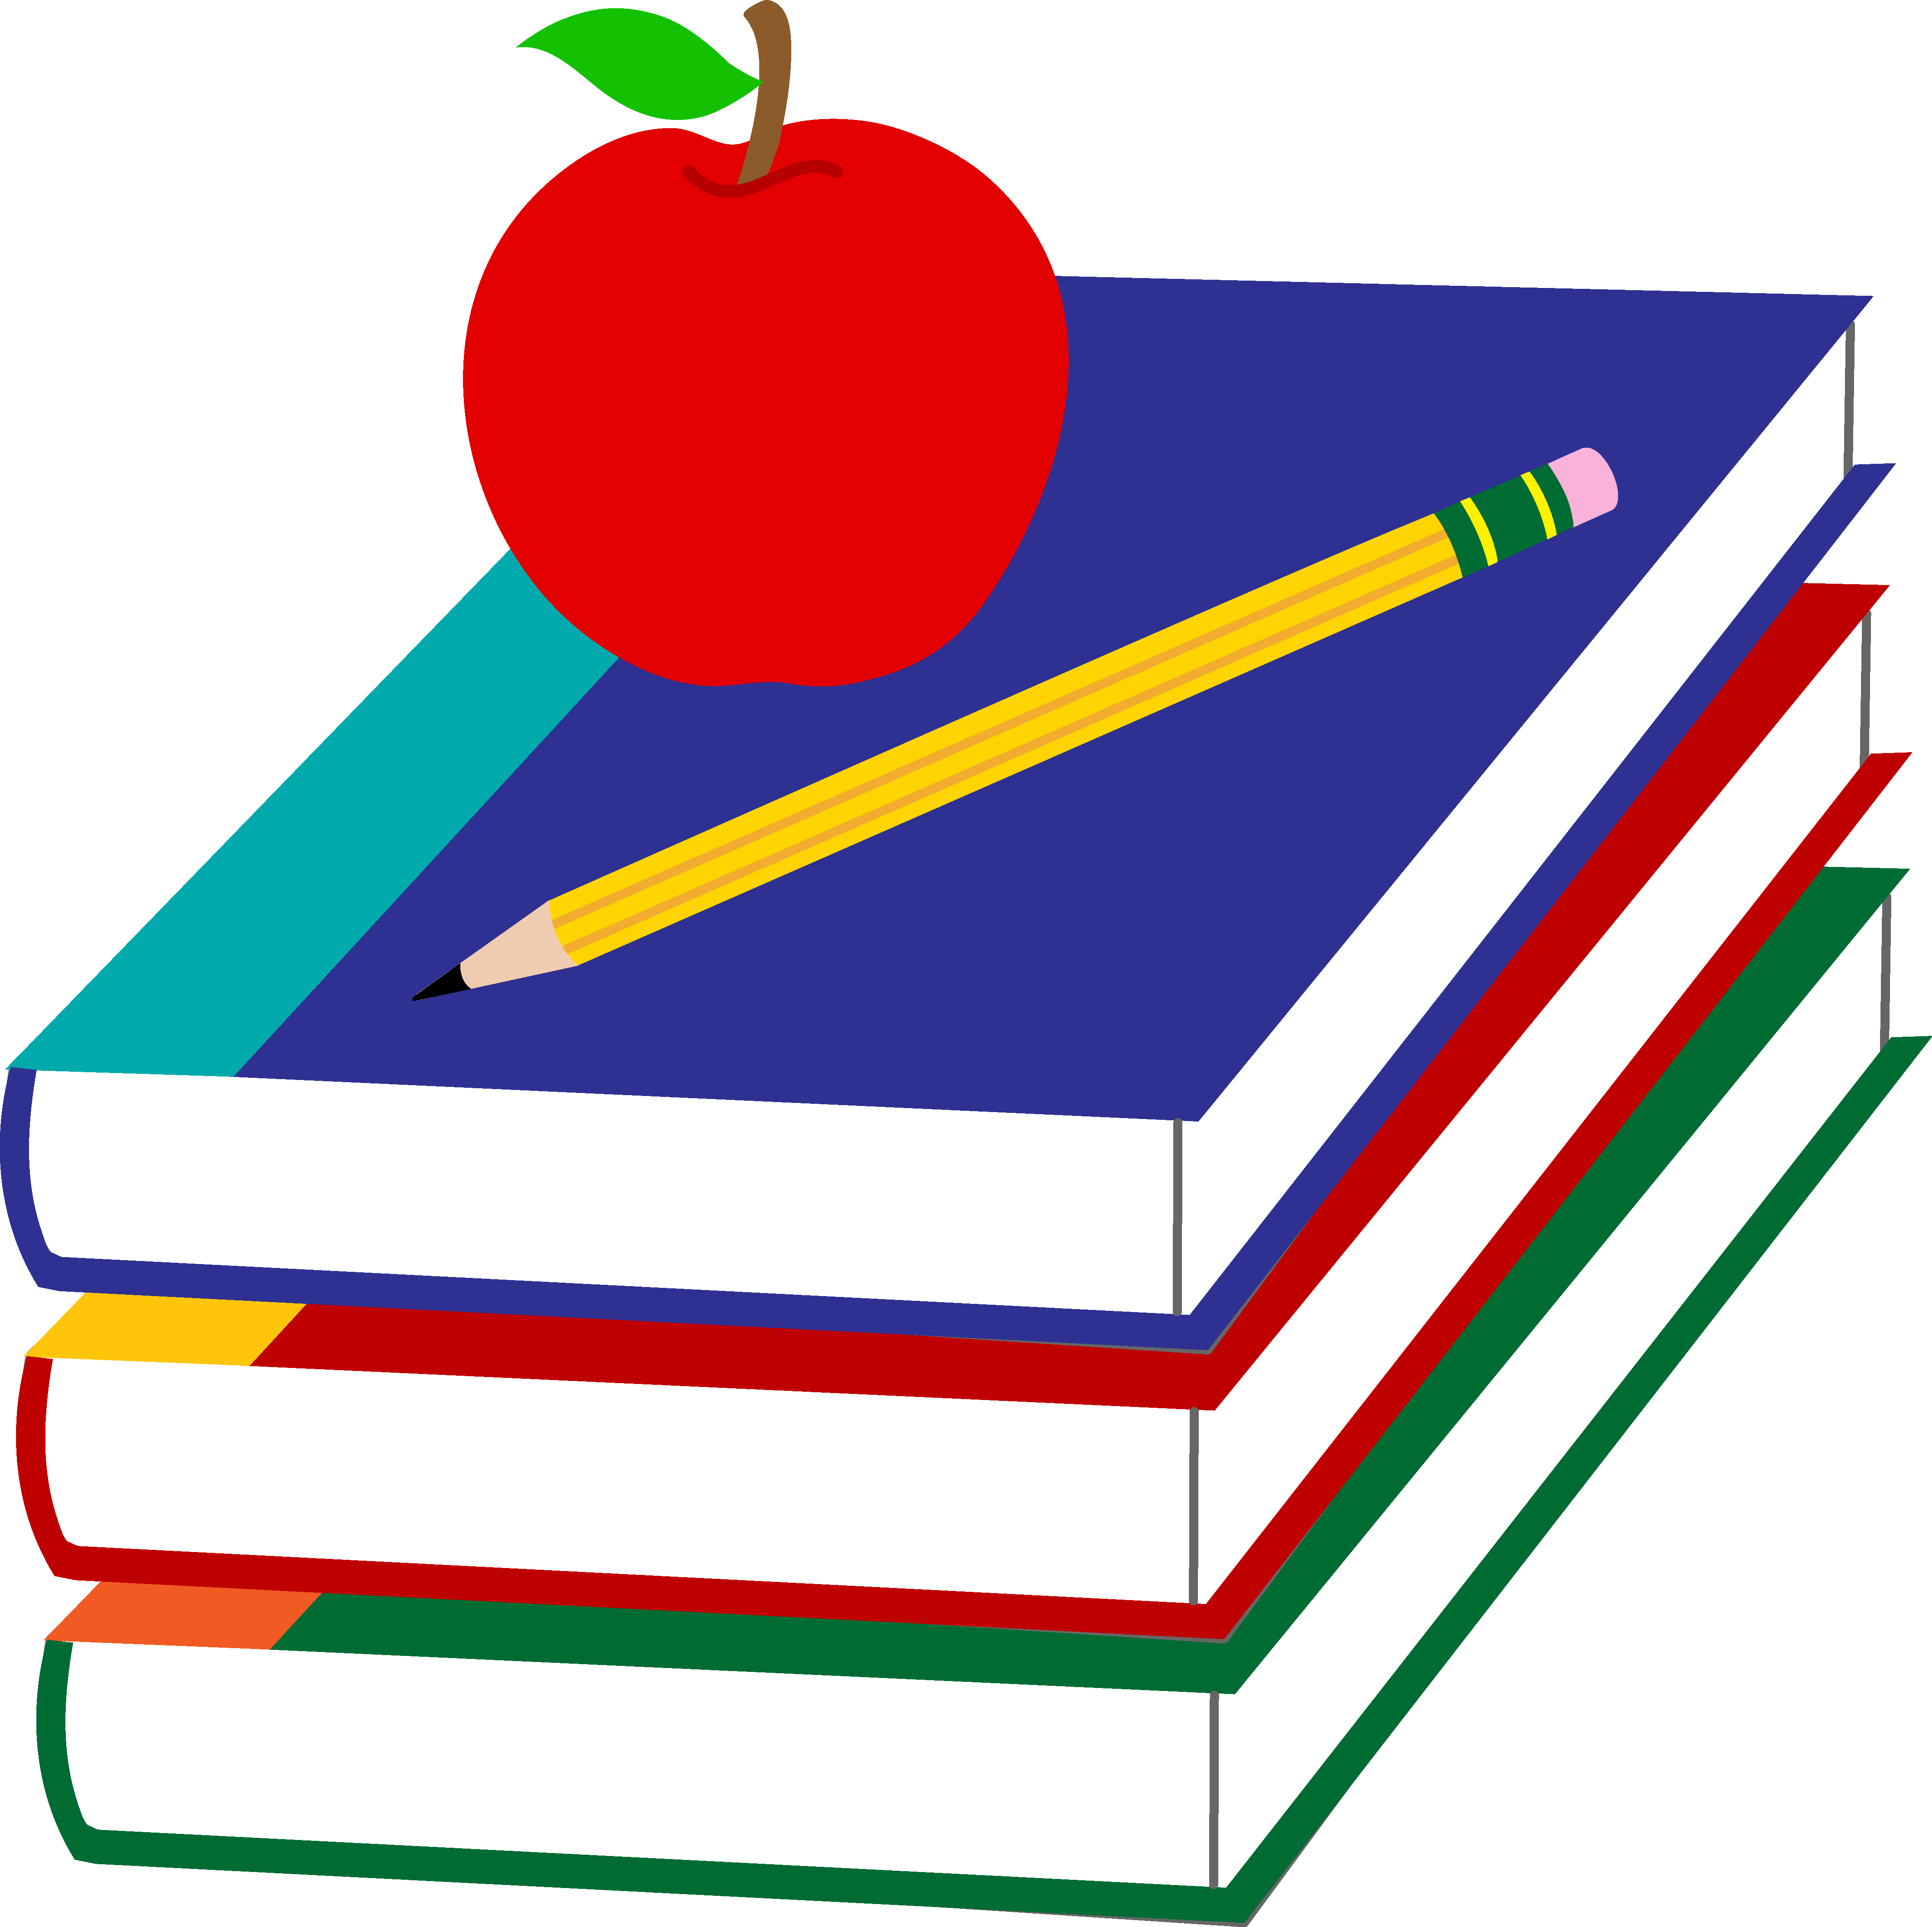 Ladder clipart book. Apple and png transparent